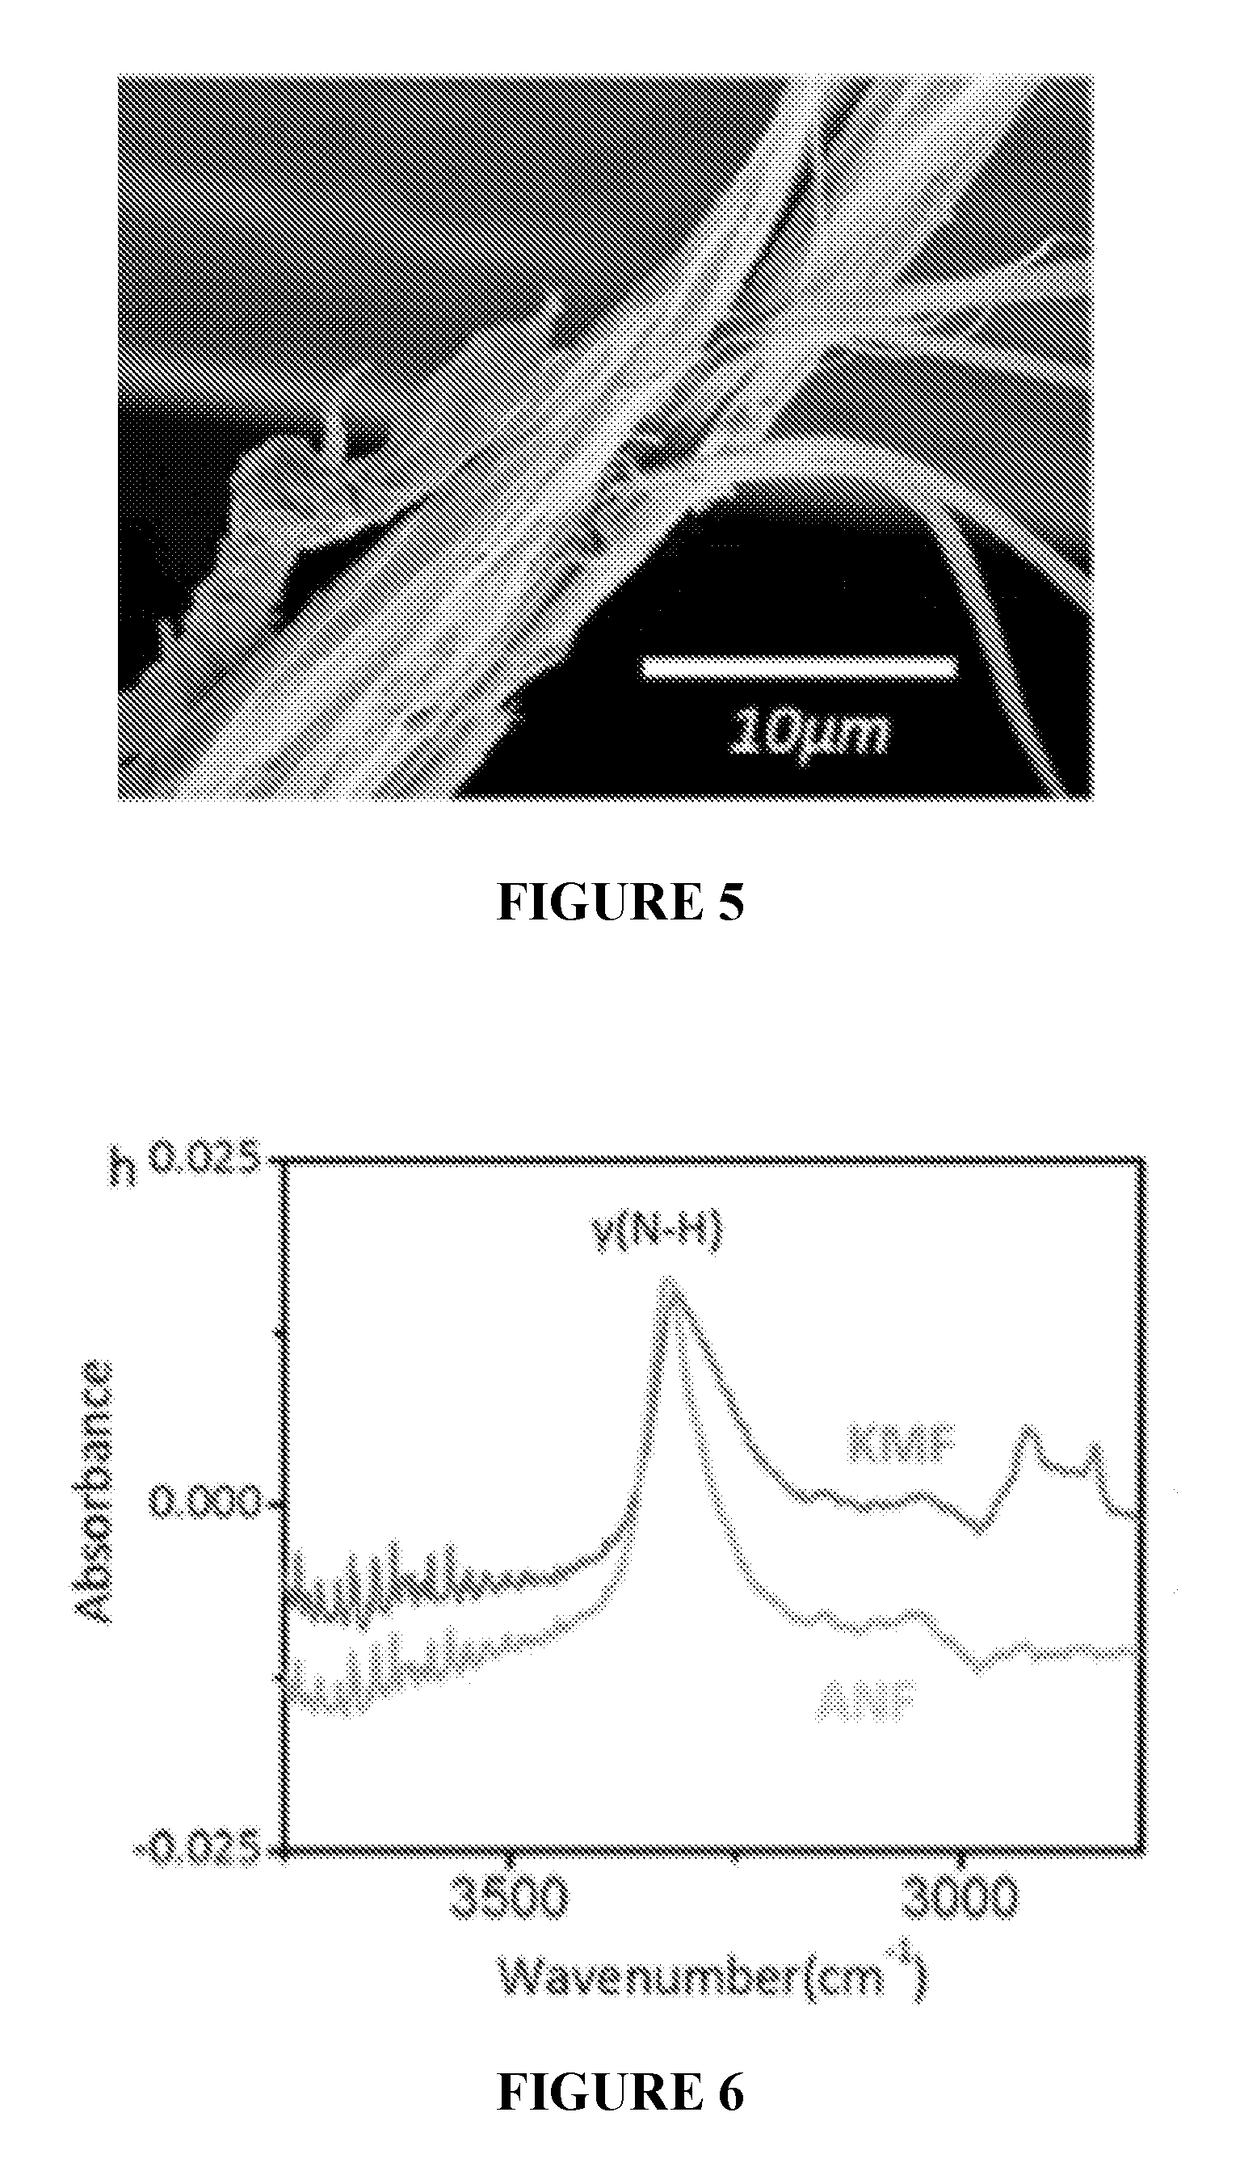 Gels and nanocomposites containing anfs